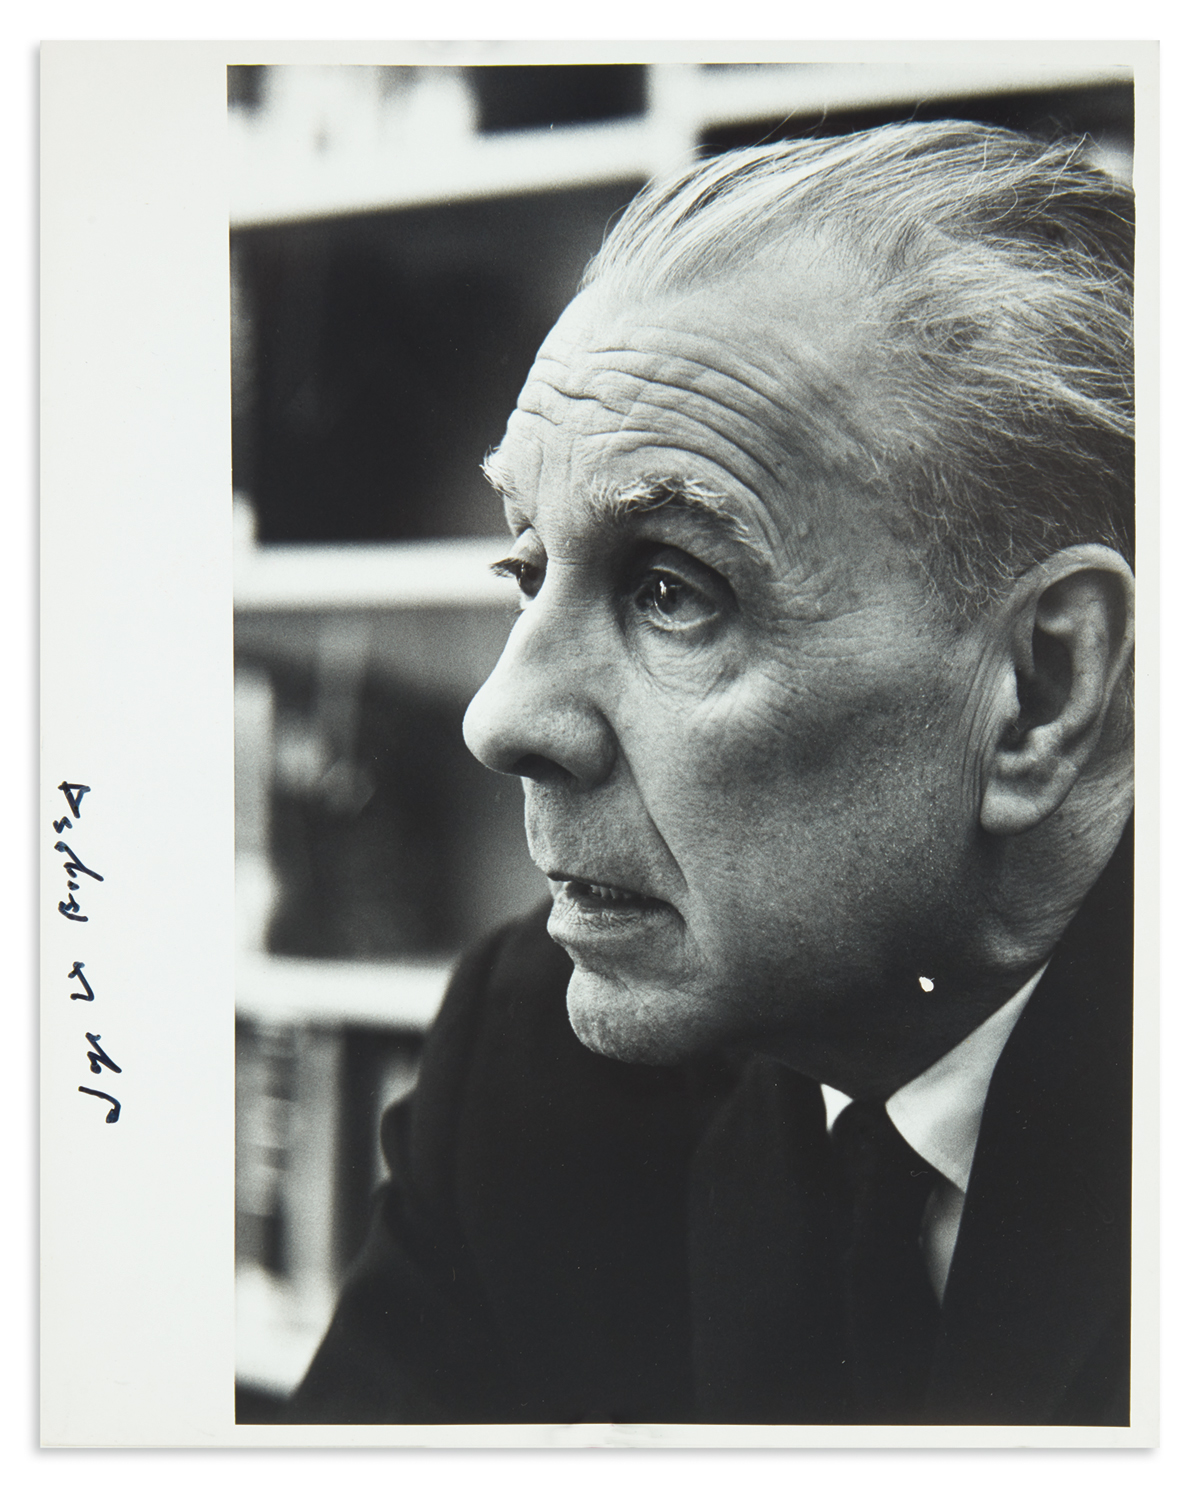 BORGES, JORGE LUIS. Photograph Signed, bust portrait by Charles Phillips, showing him in profile.